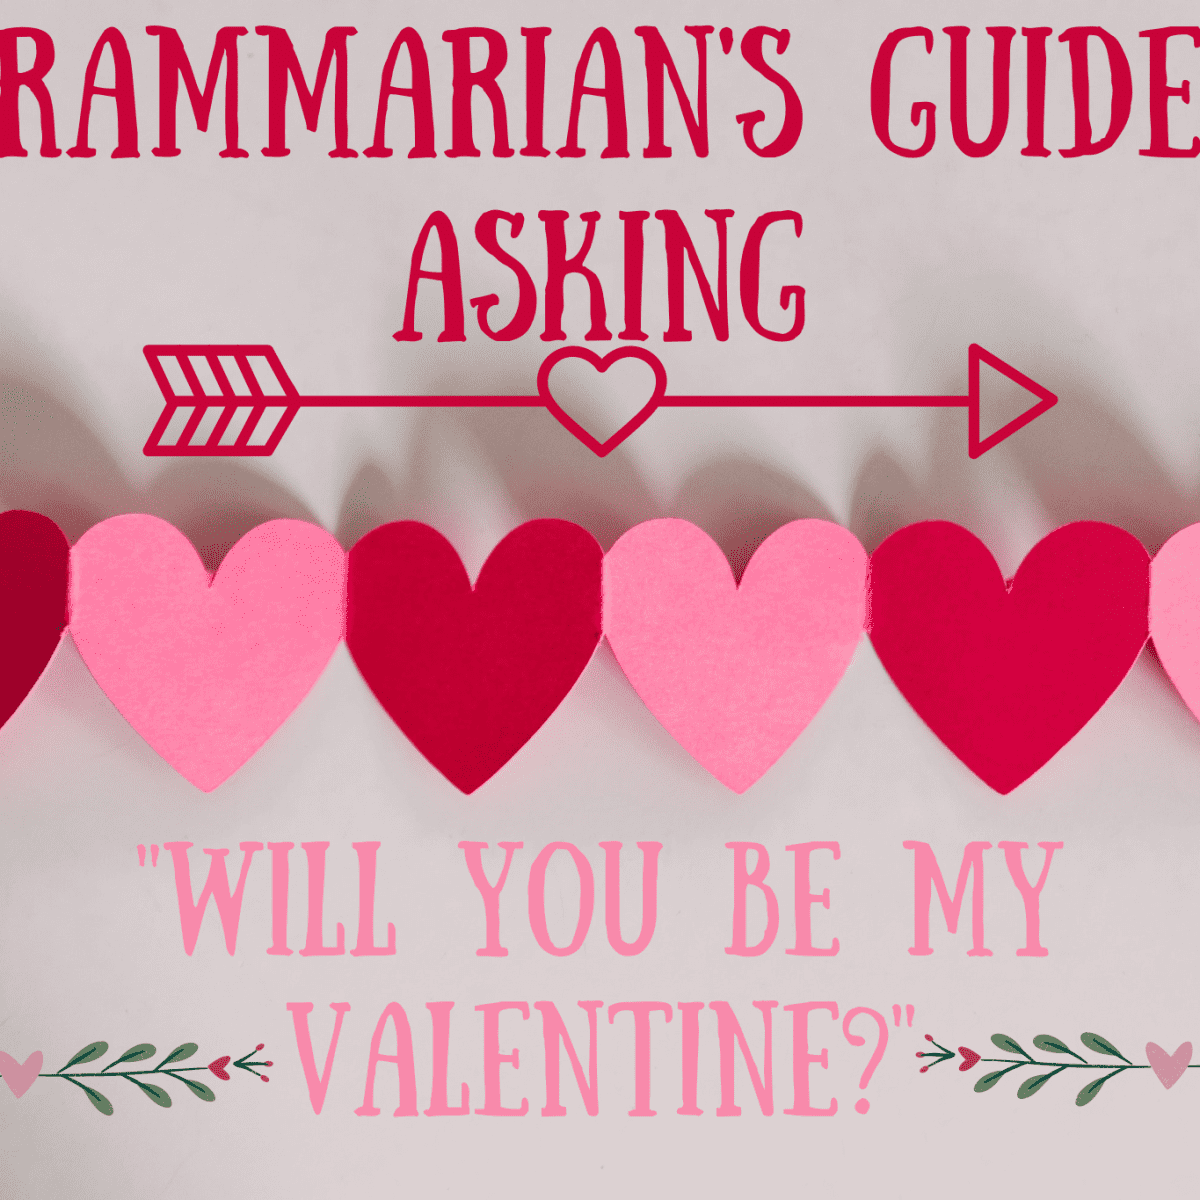 A Grammarian's Guide to Asking, "Will You Be My Valentine?" - Holidappy